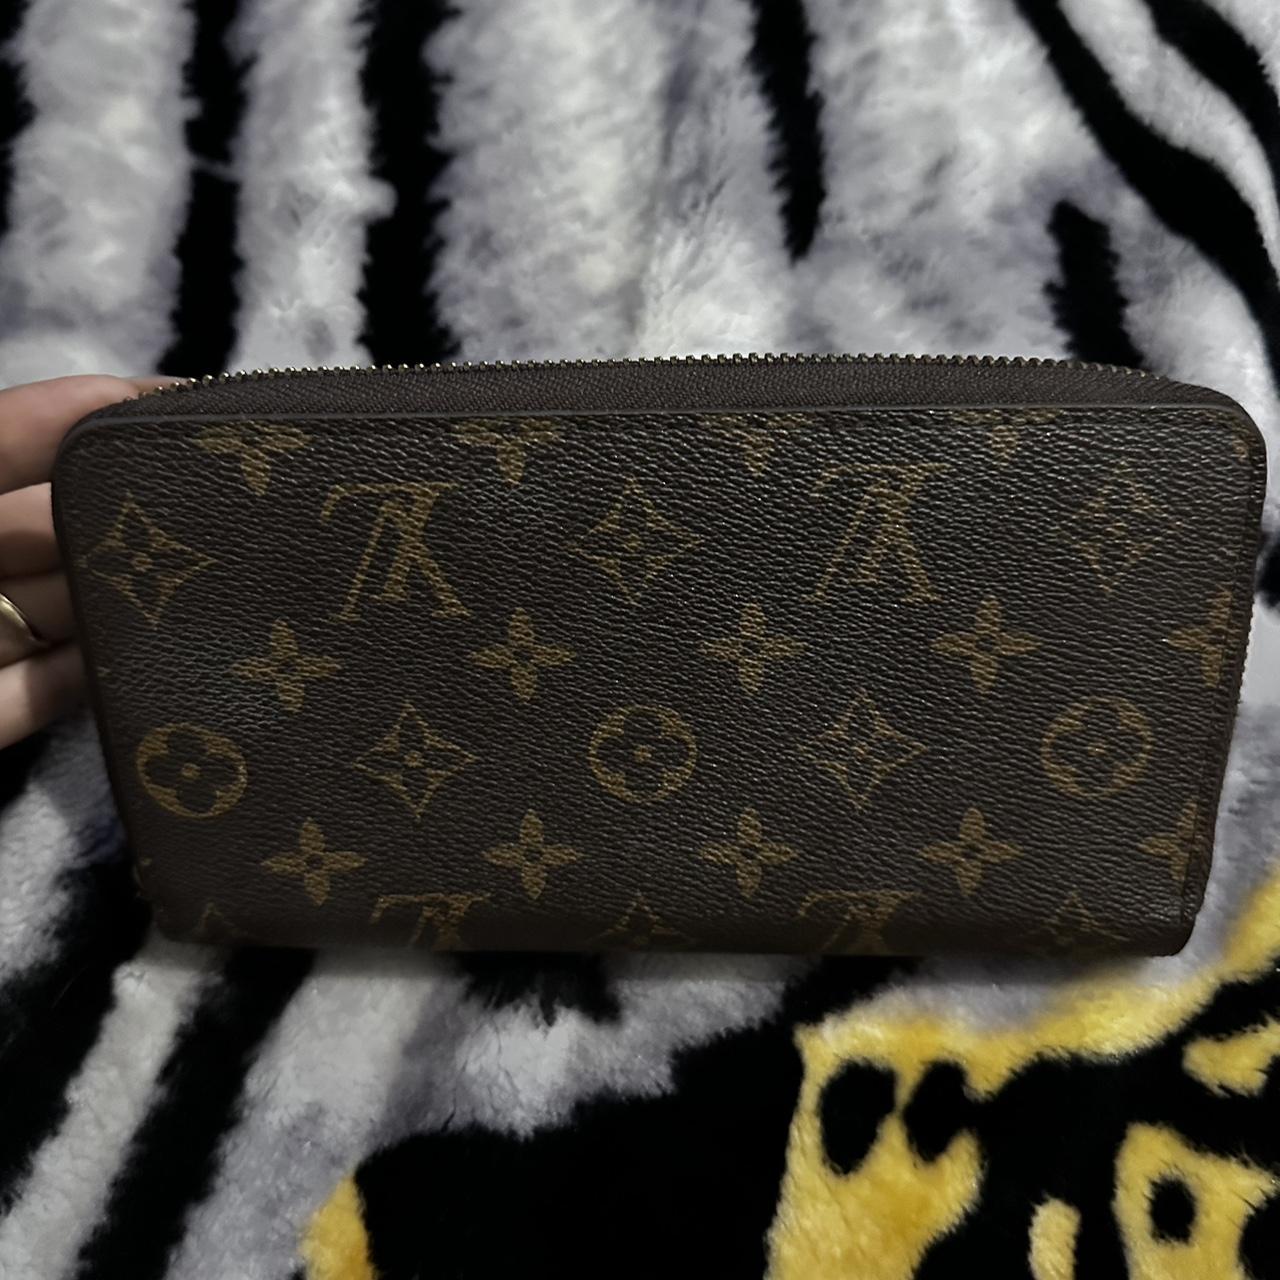 Fairly used LV wallet, Inside zipper works just